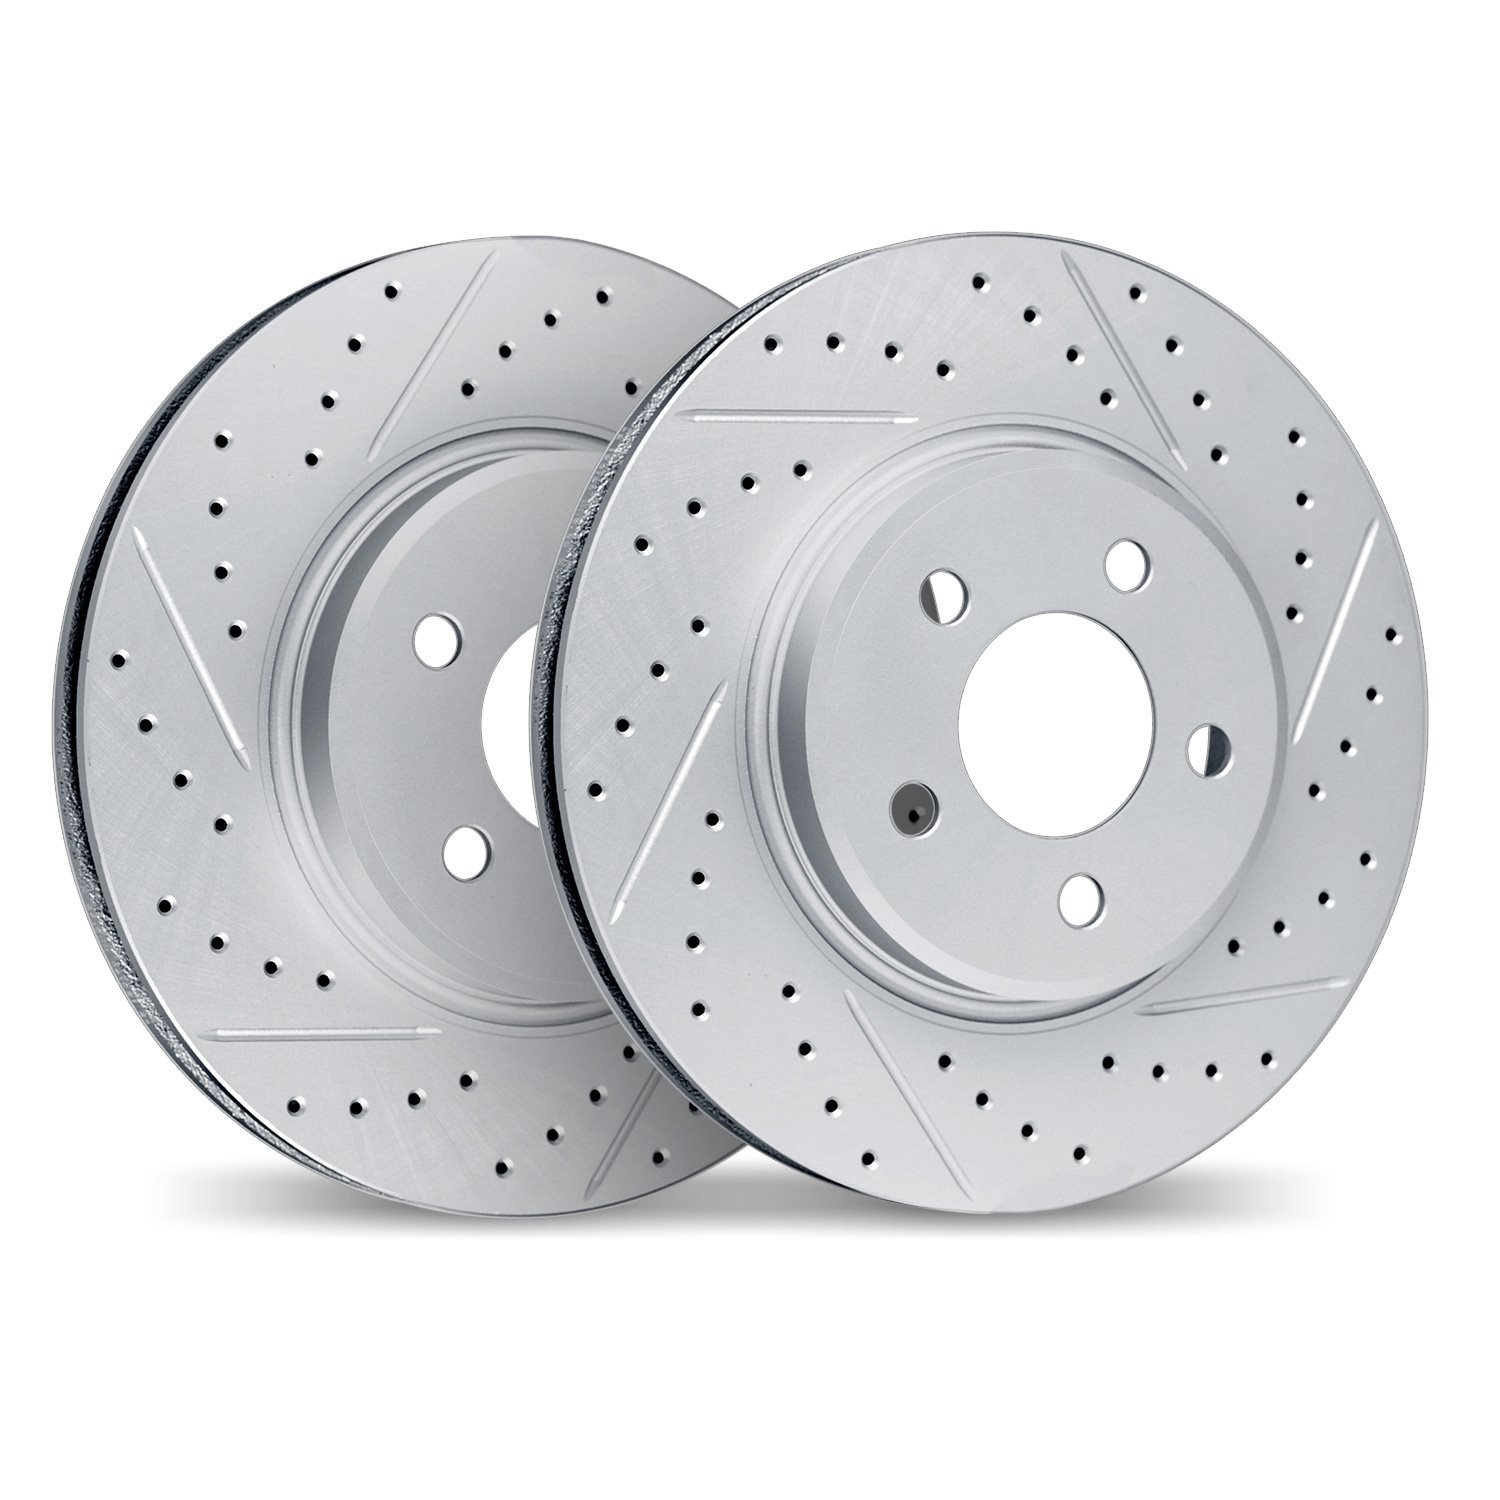 2002-46034 Geoperformance Drilled/Slotted Brake Rotors, 1997-2013 GM, Position: Rear